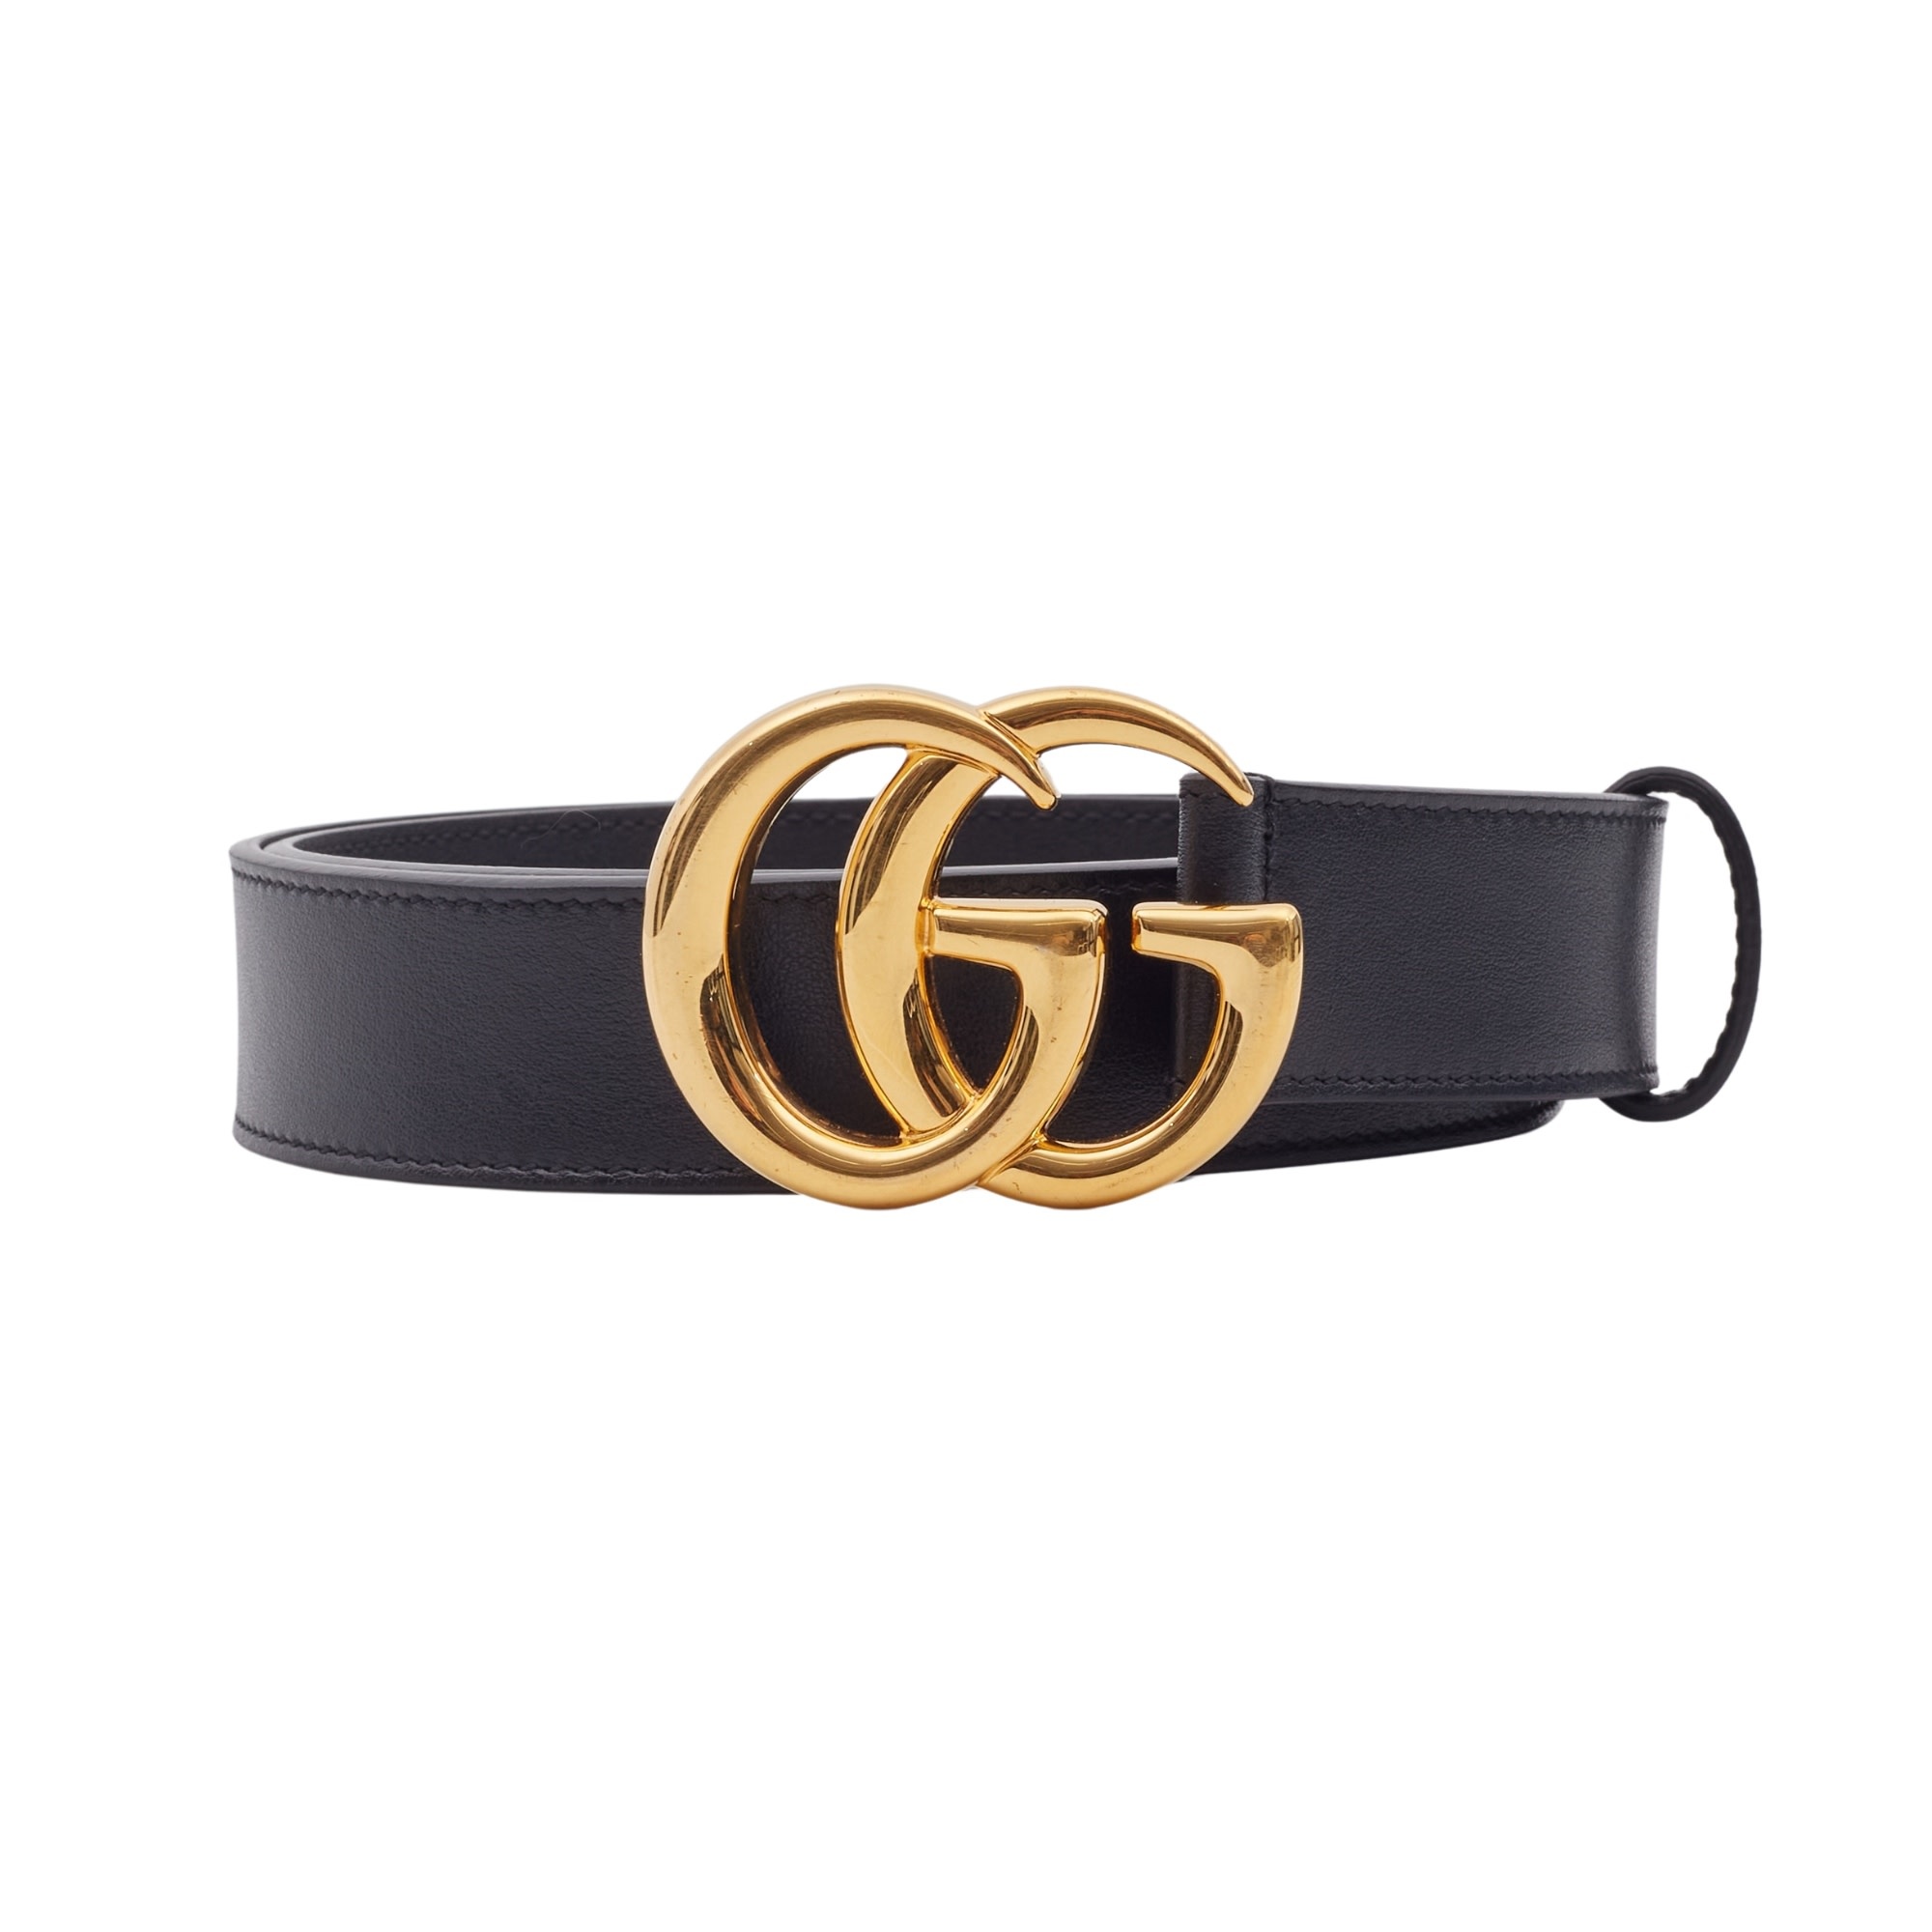 GUCCI GG MARMONT BLACK LEATHER BELT (SIZE 80/32)